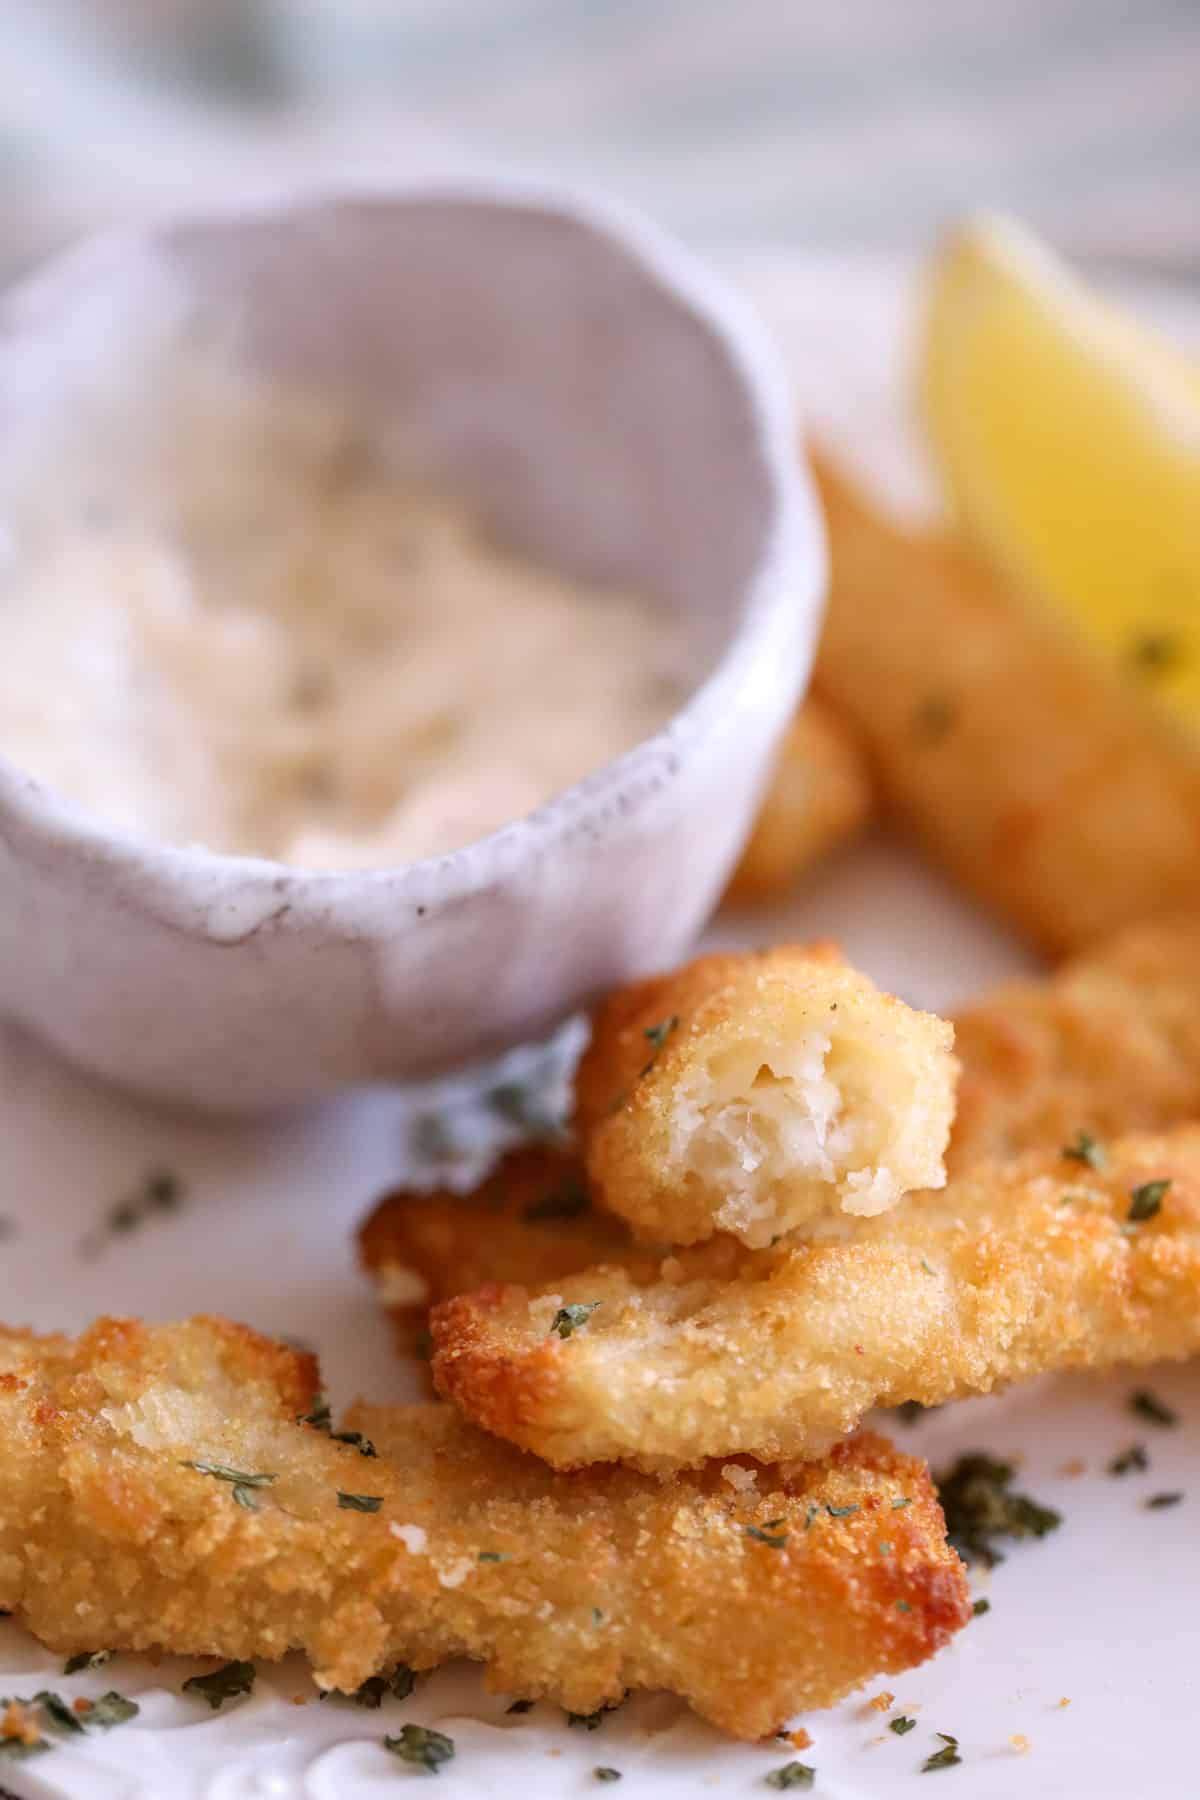 crunchy fish stick broken in half next to a side of tartar sauce with lemon wedges